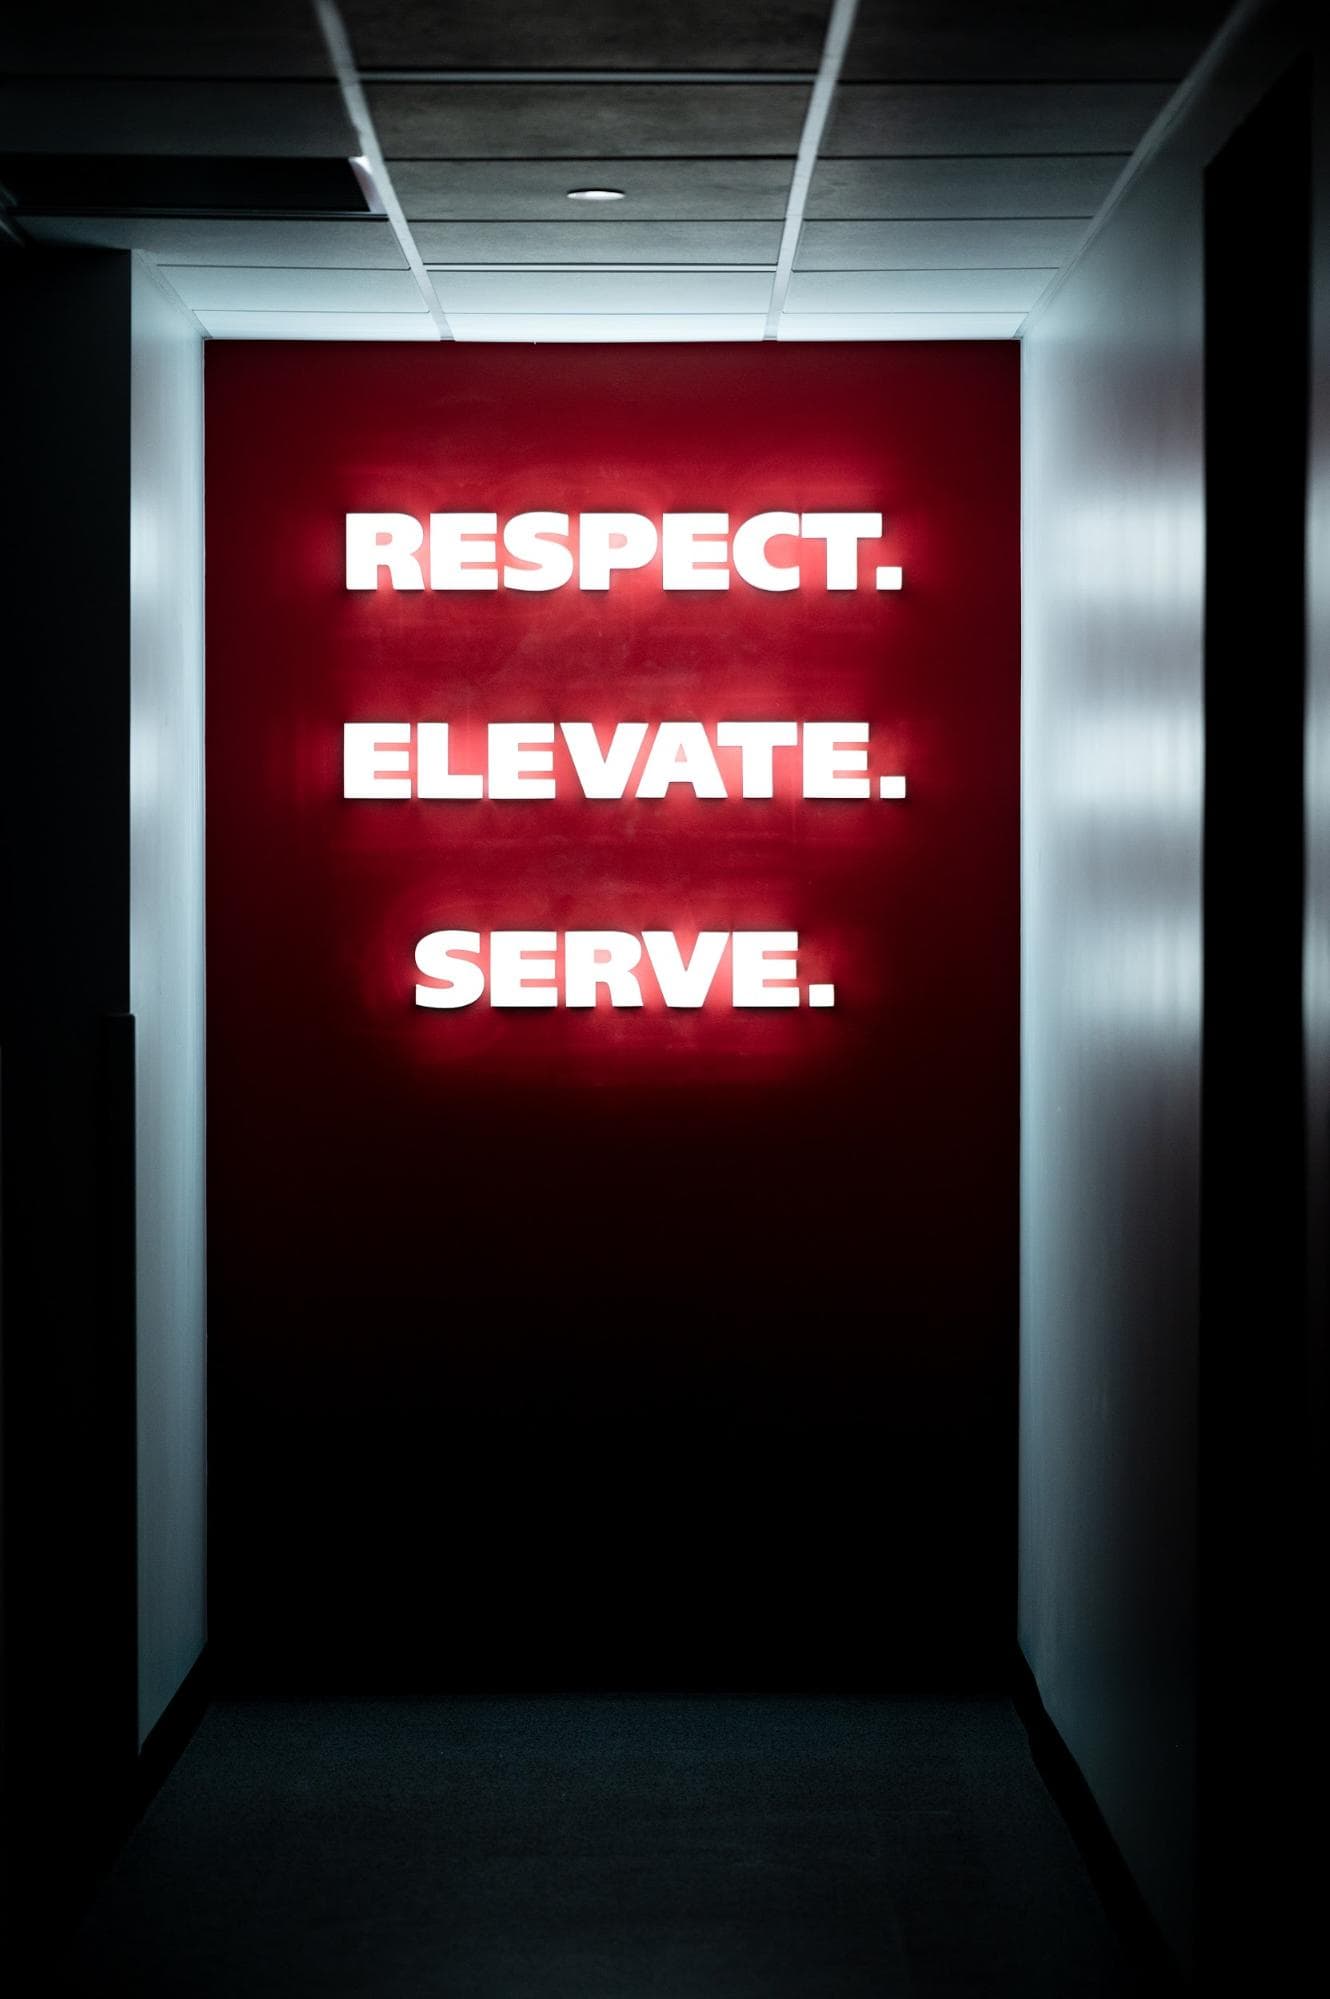 A lit up sign in the men's locker room that says "Respect. Elevate. Serve." 